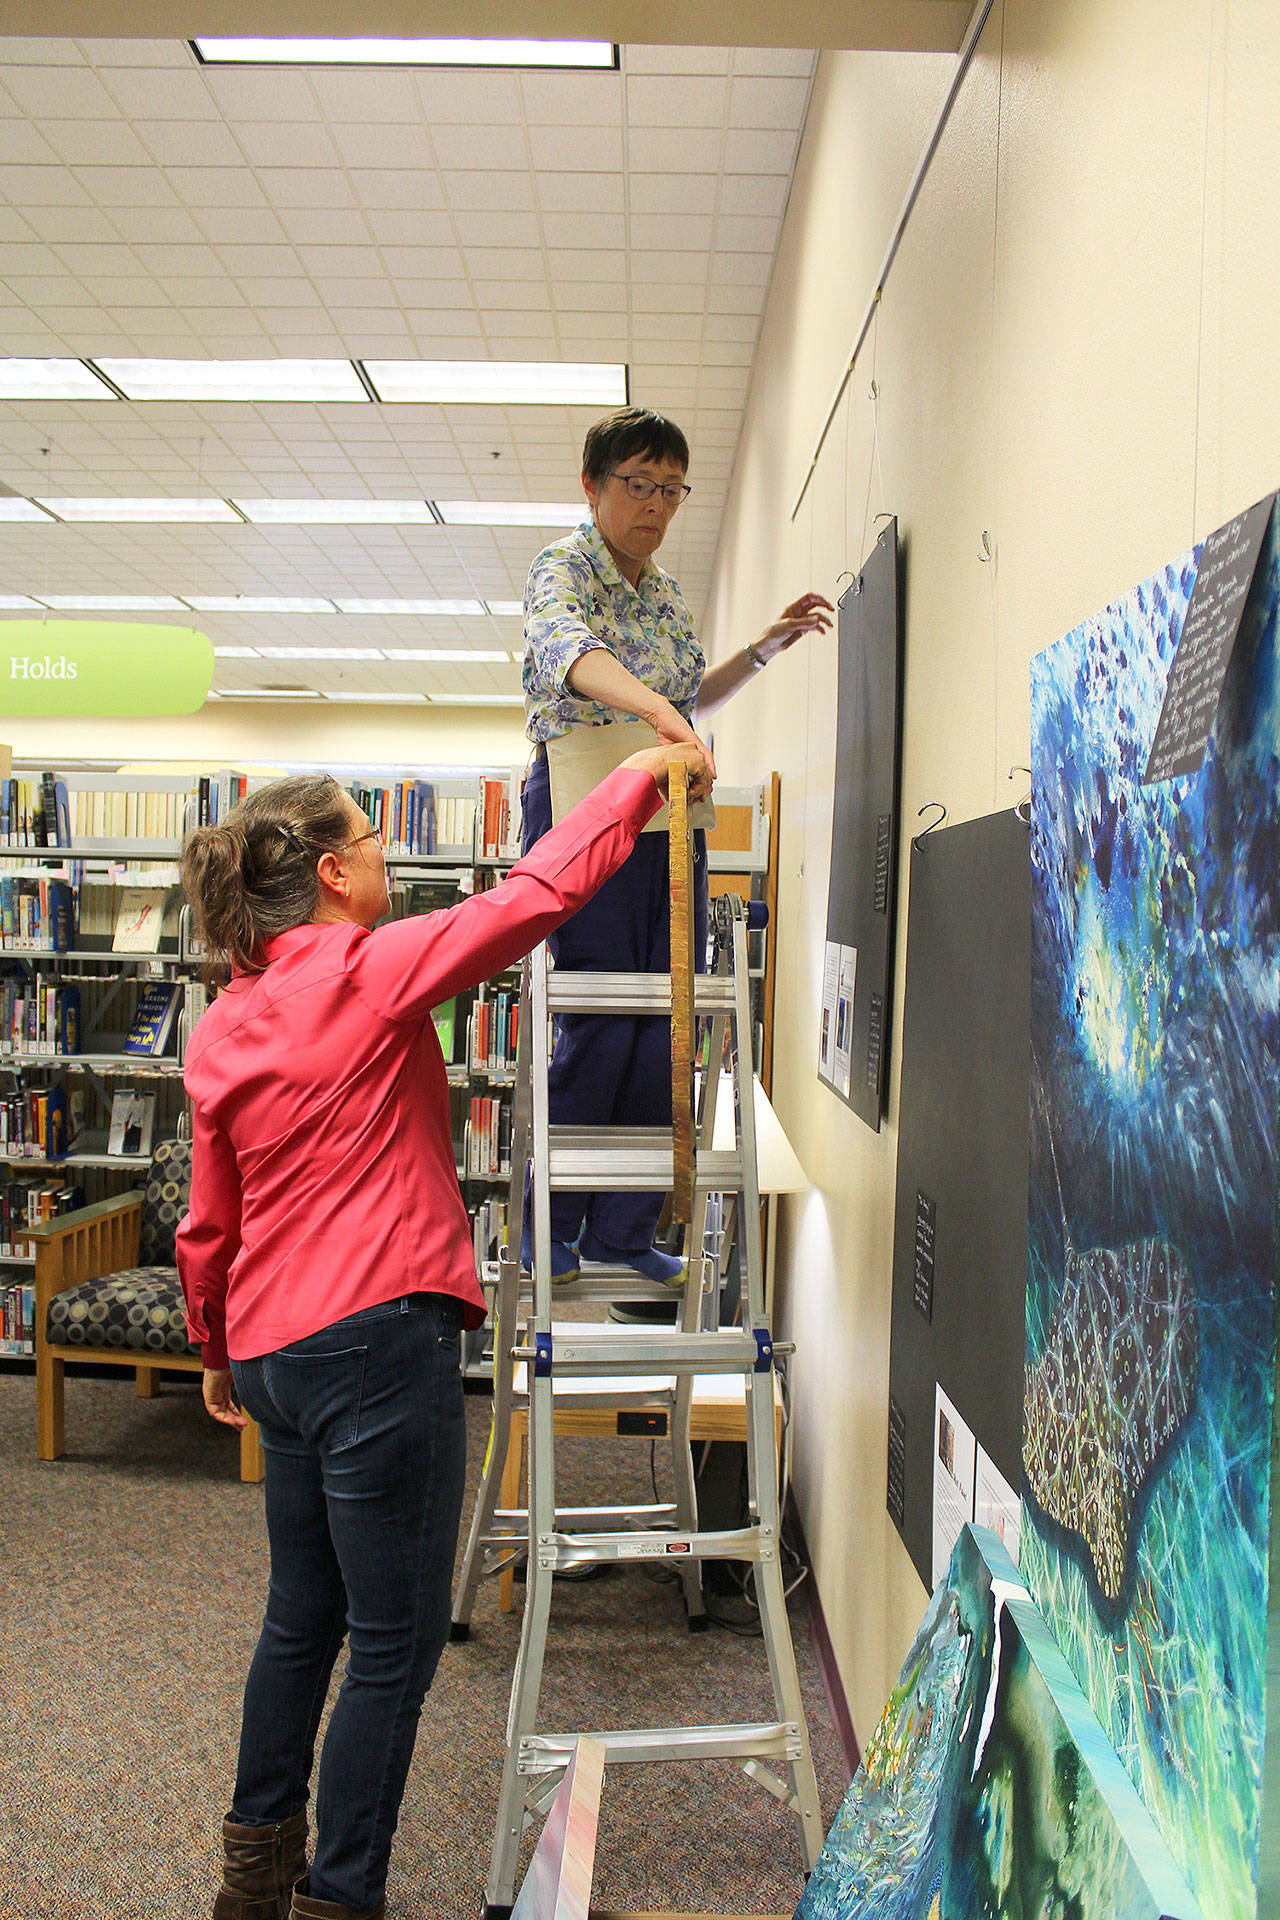 Tina Christiansen hangs her paintings at the Oak Harbor Library where she’ll be the featured artist through August. She’s assisted by librarian Nancy Luenn. Photo by Patricia Guthrie/Whidbey News-Times